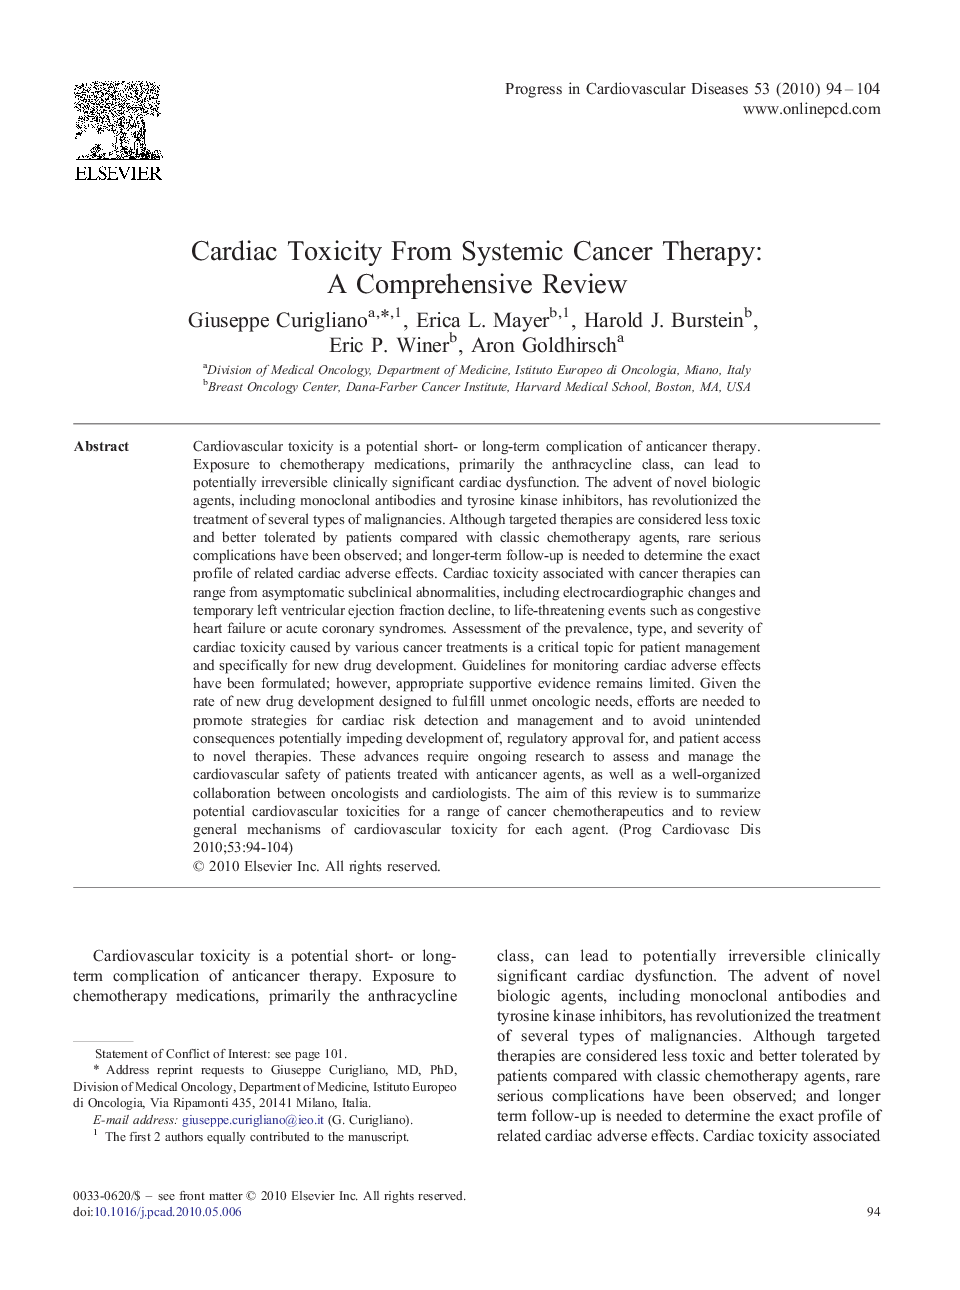 Cardiac Toxicity From Systemic Cancer Therapy: A Comprehensive Review 